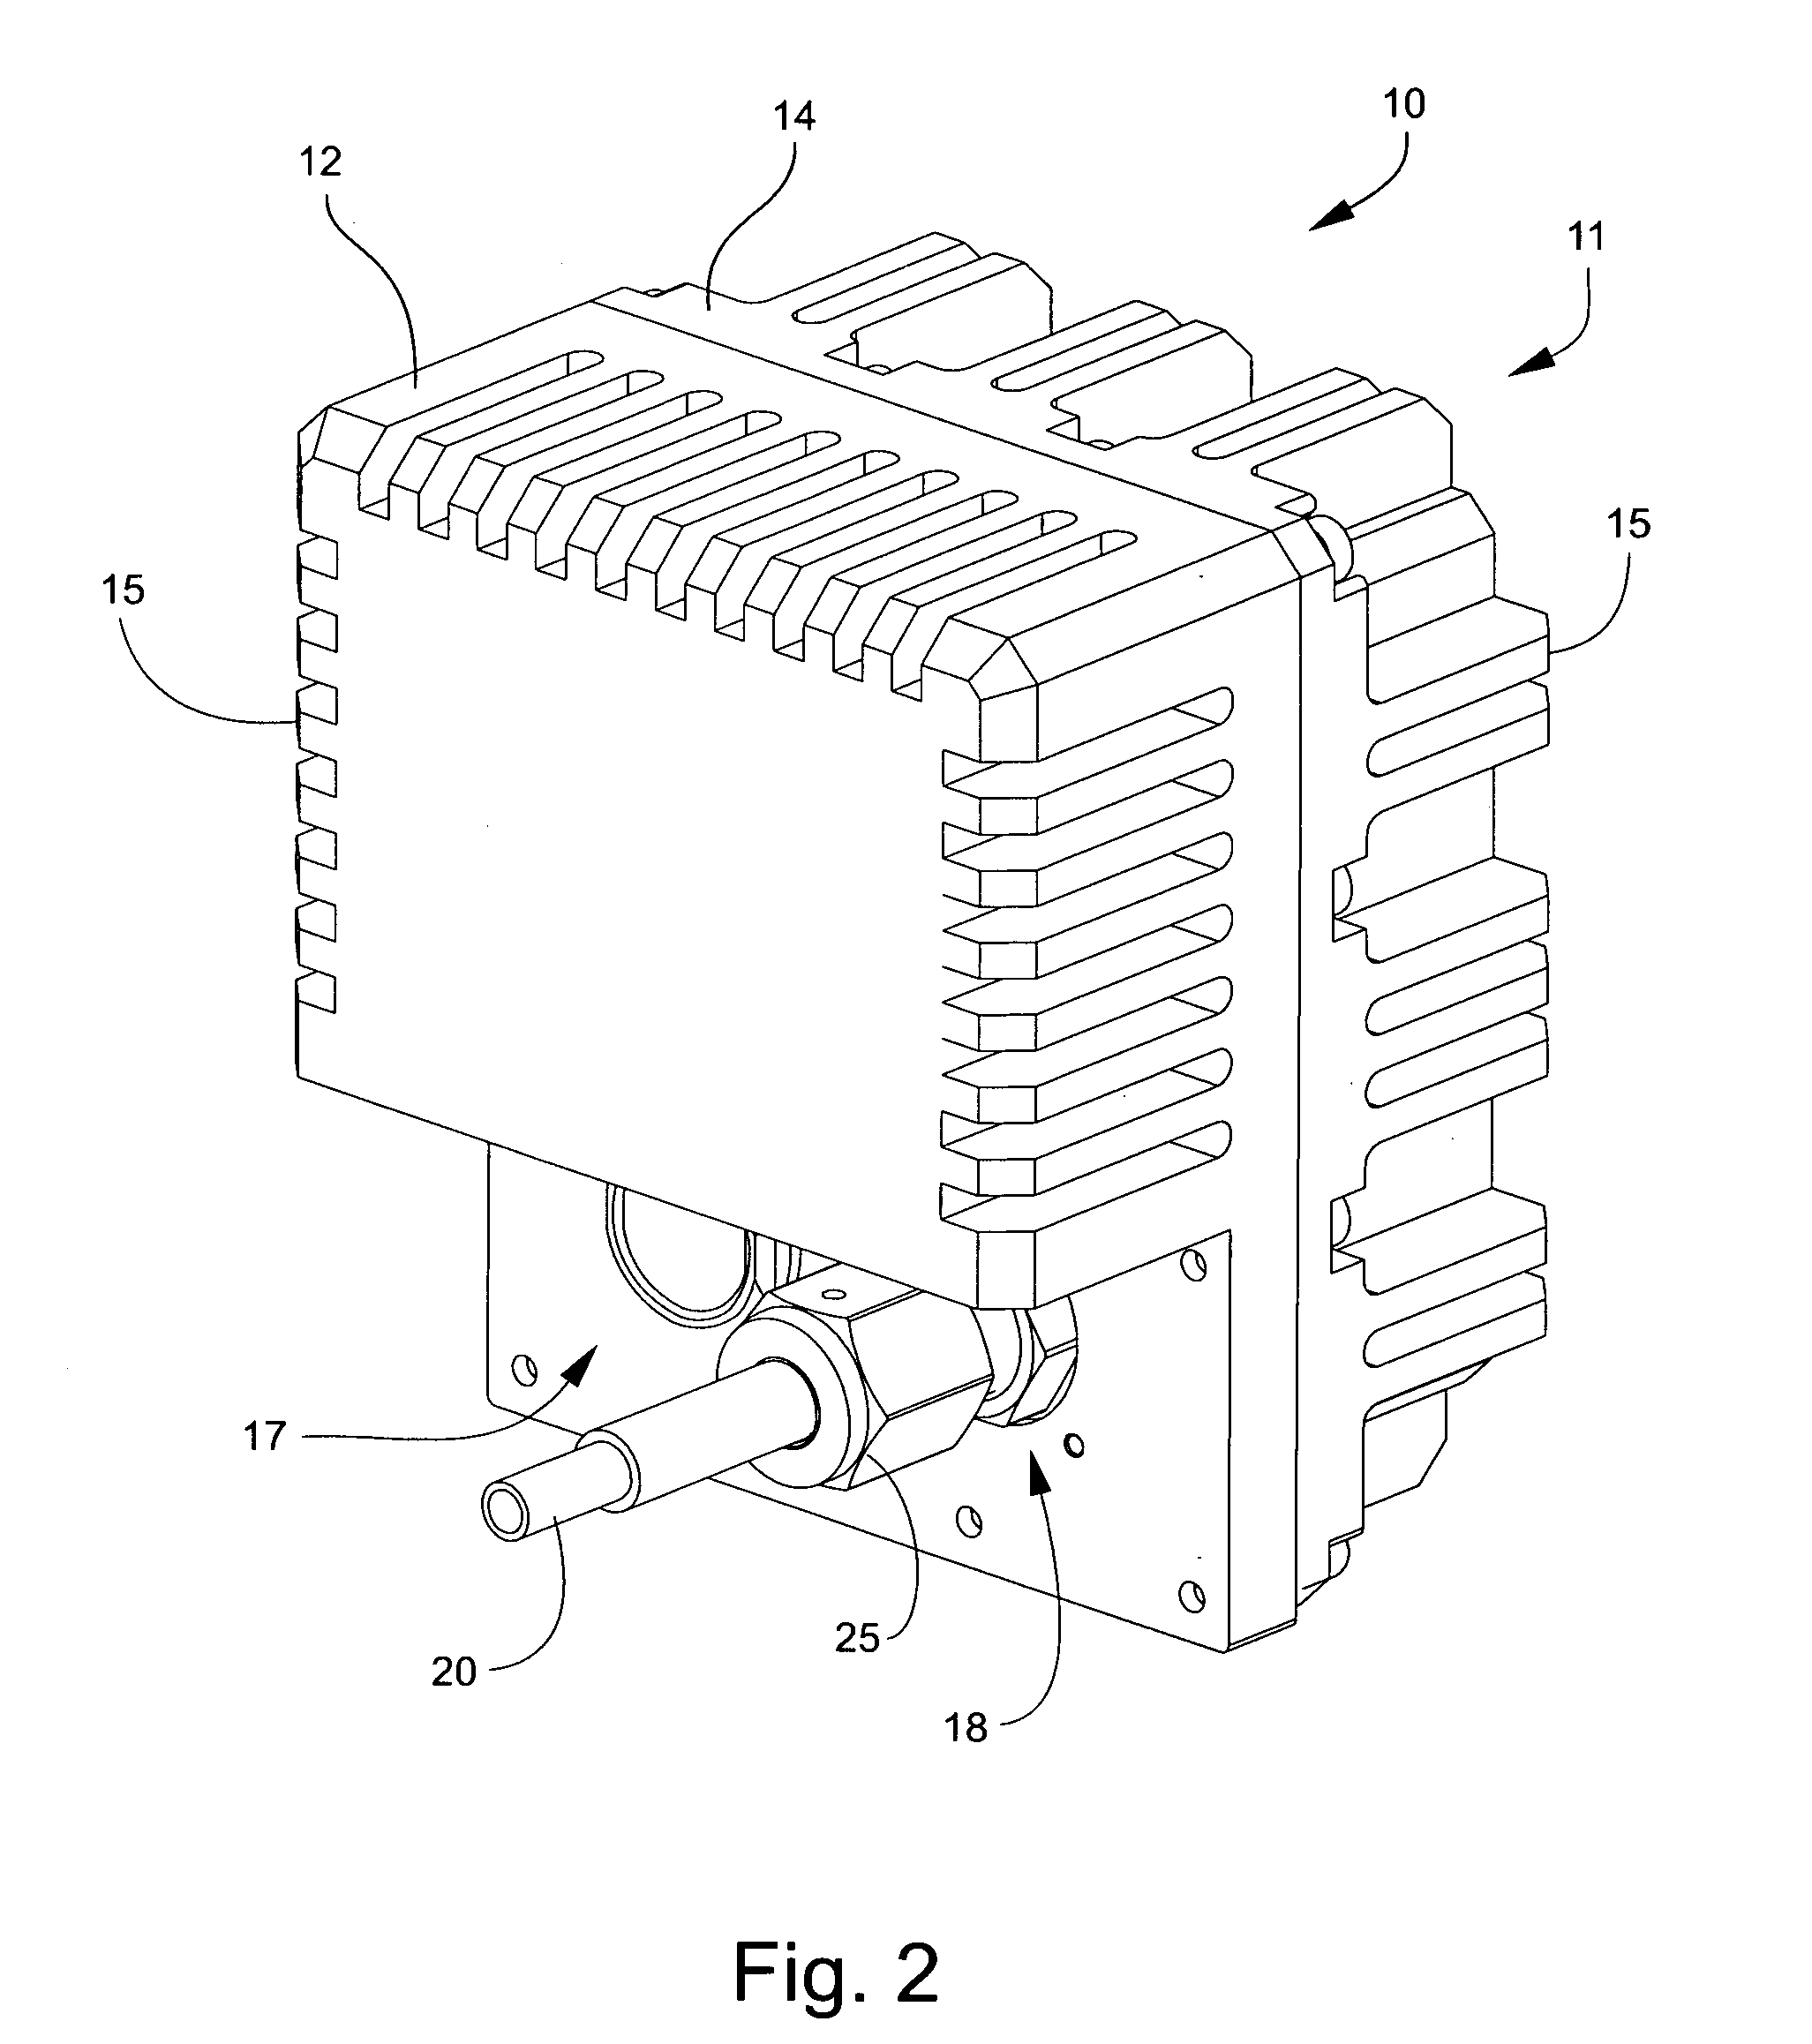 CCD camera architecture and methods of manufacture